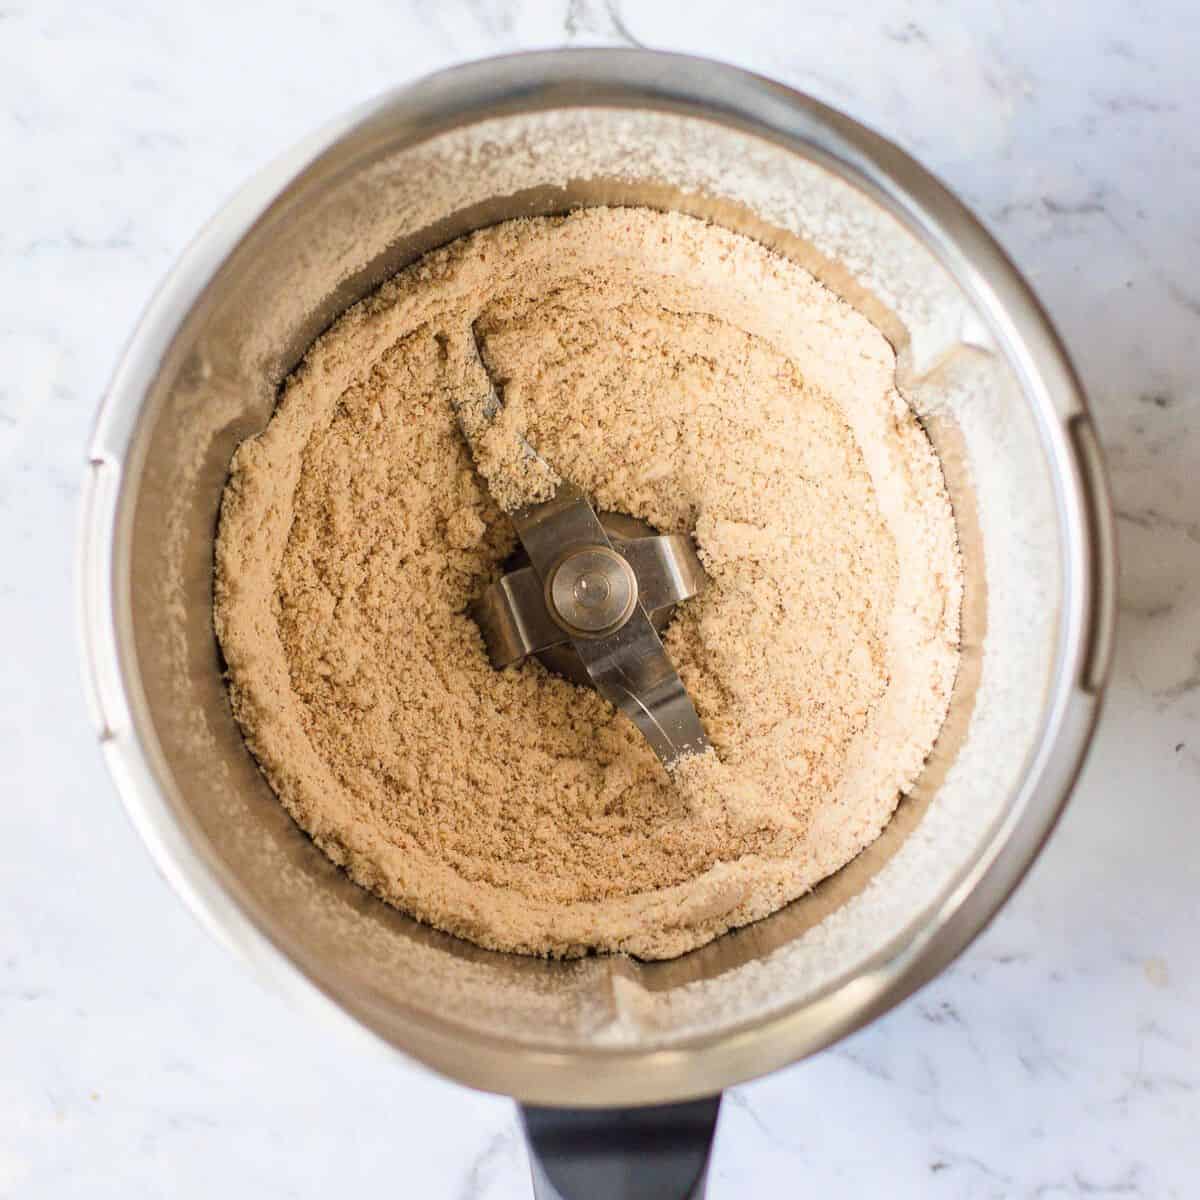 Oat and almond flour in a Thermomix bowl.